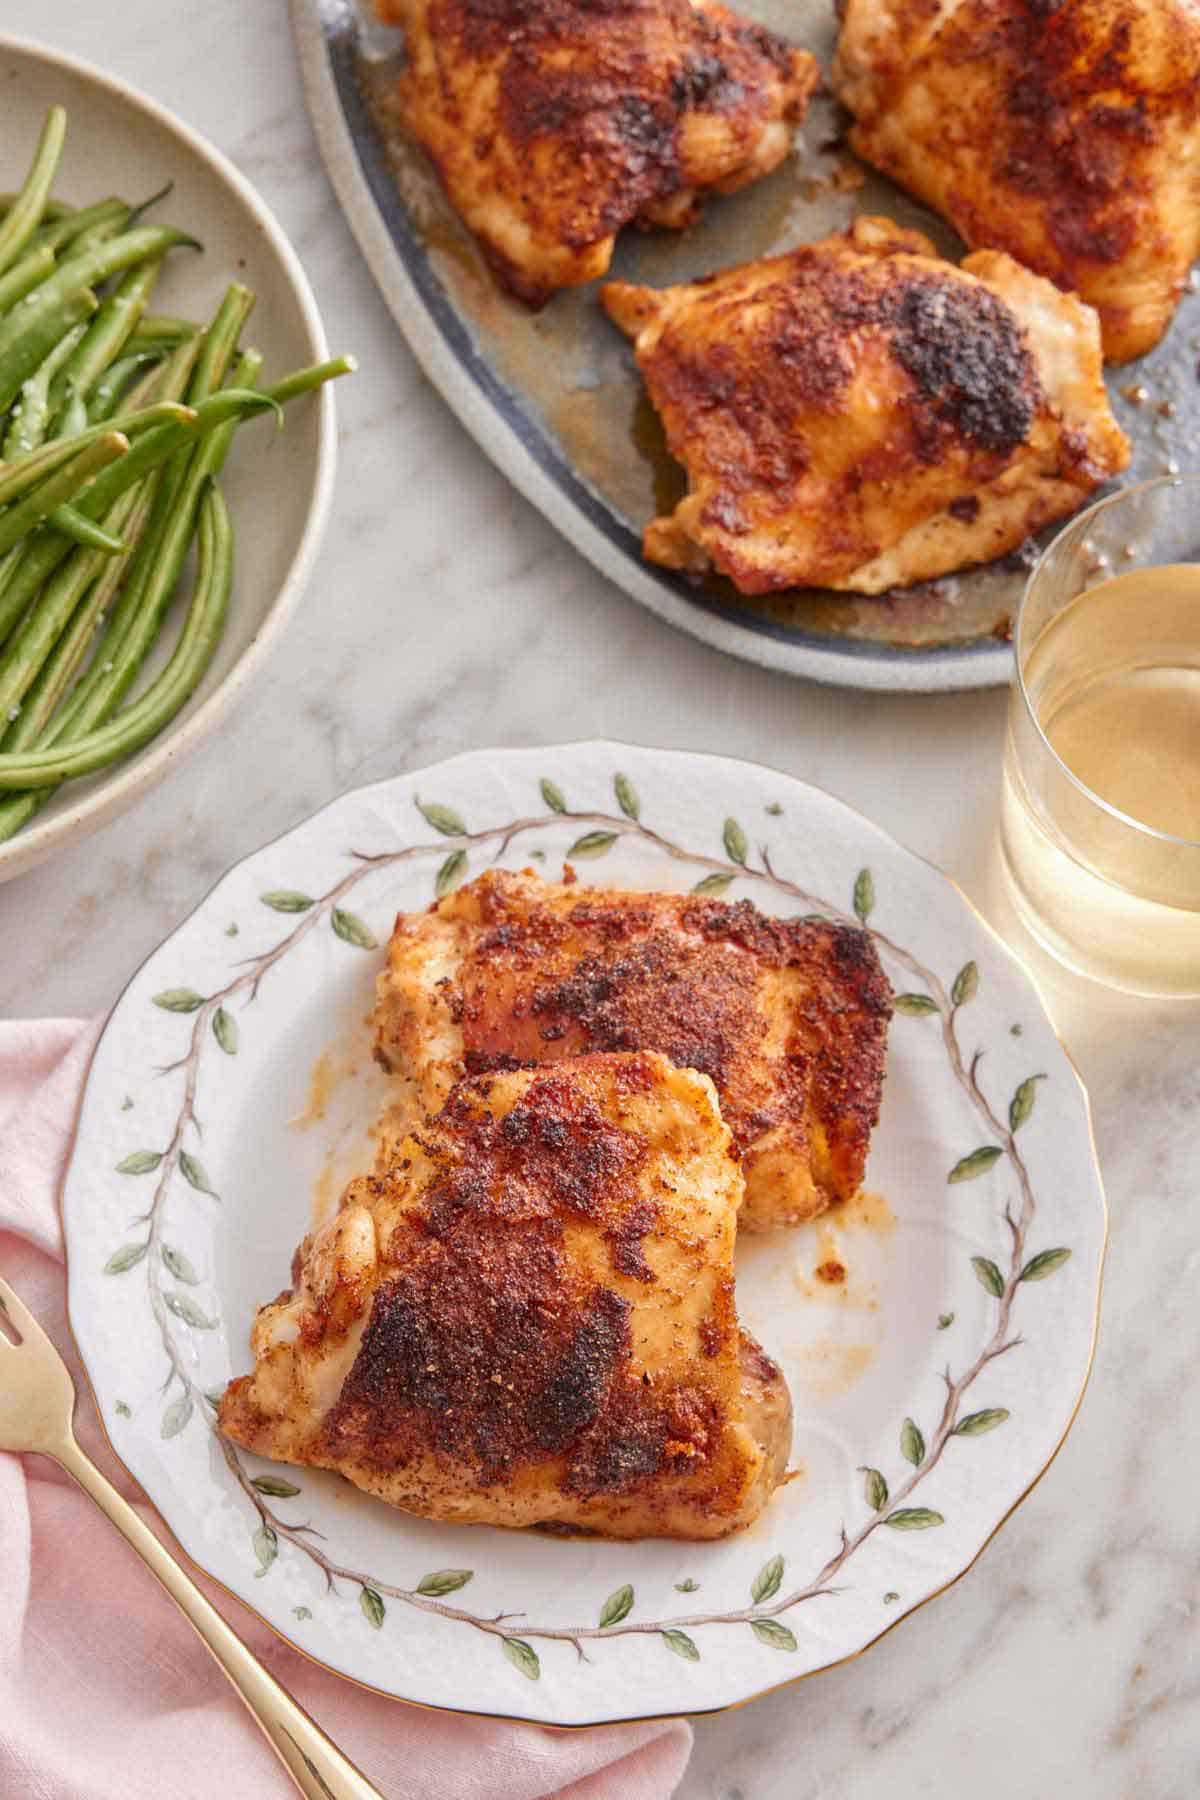 Overhead view of a plate with two baked chicken thighs beside a glass of wine, platter of chicken, and green beans.